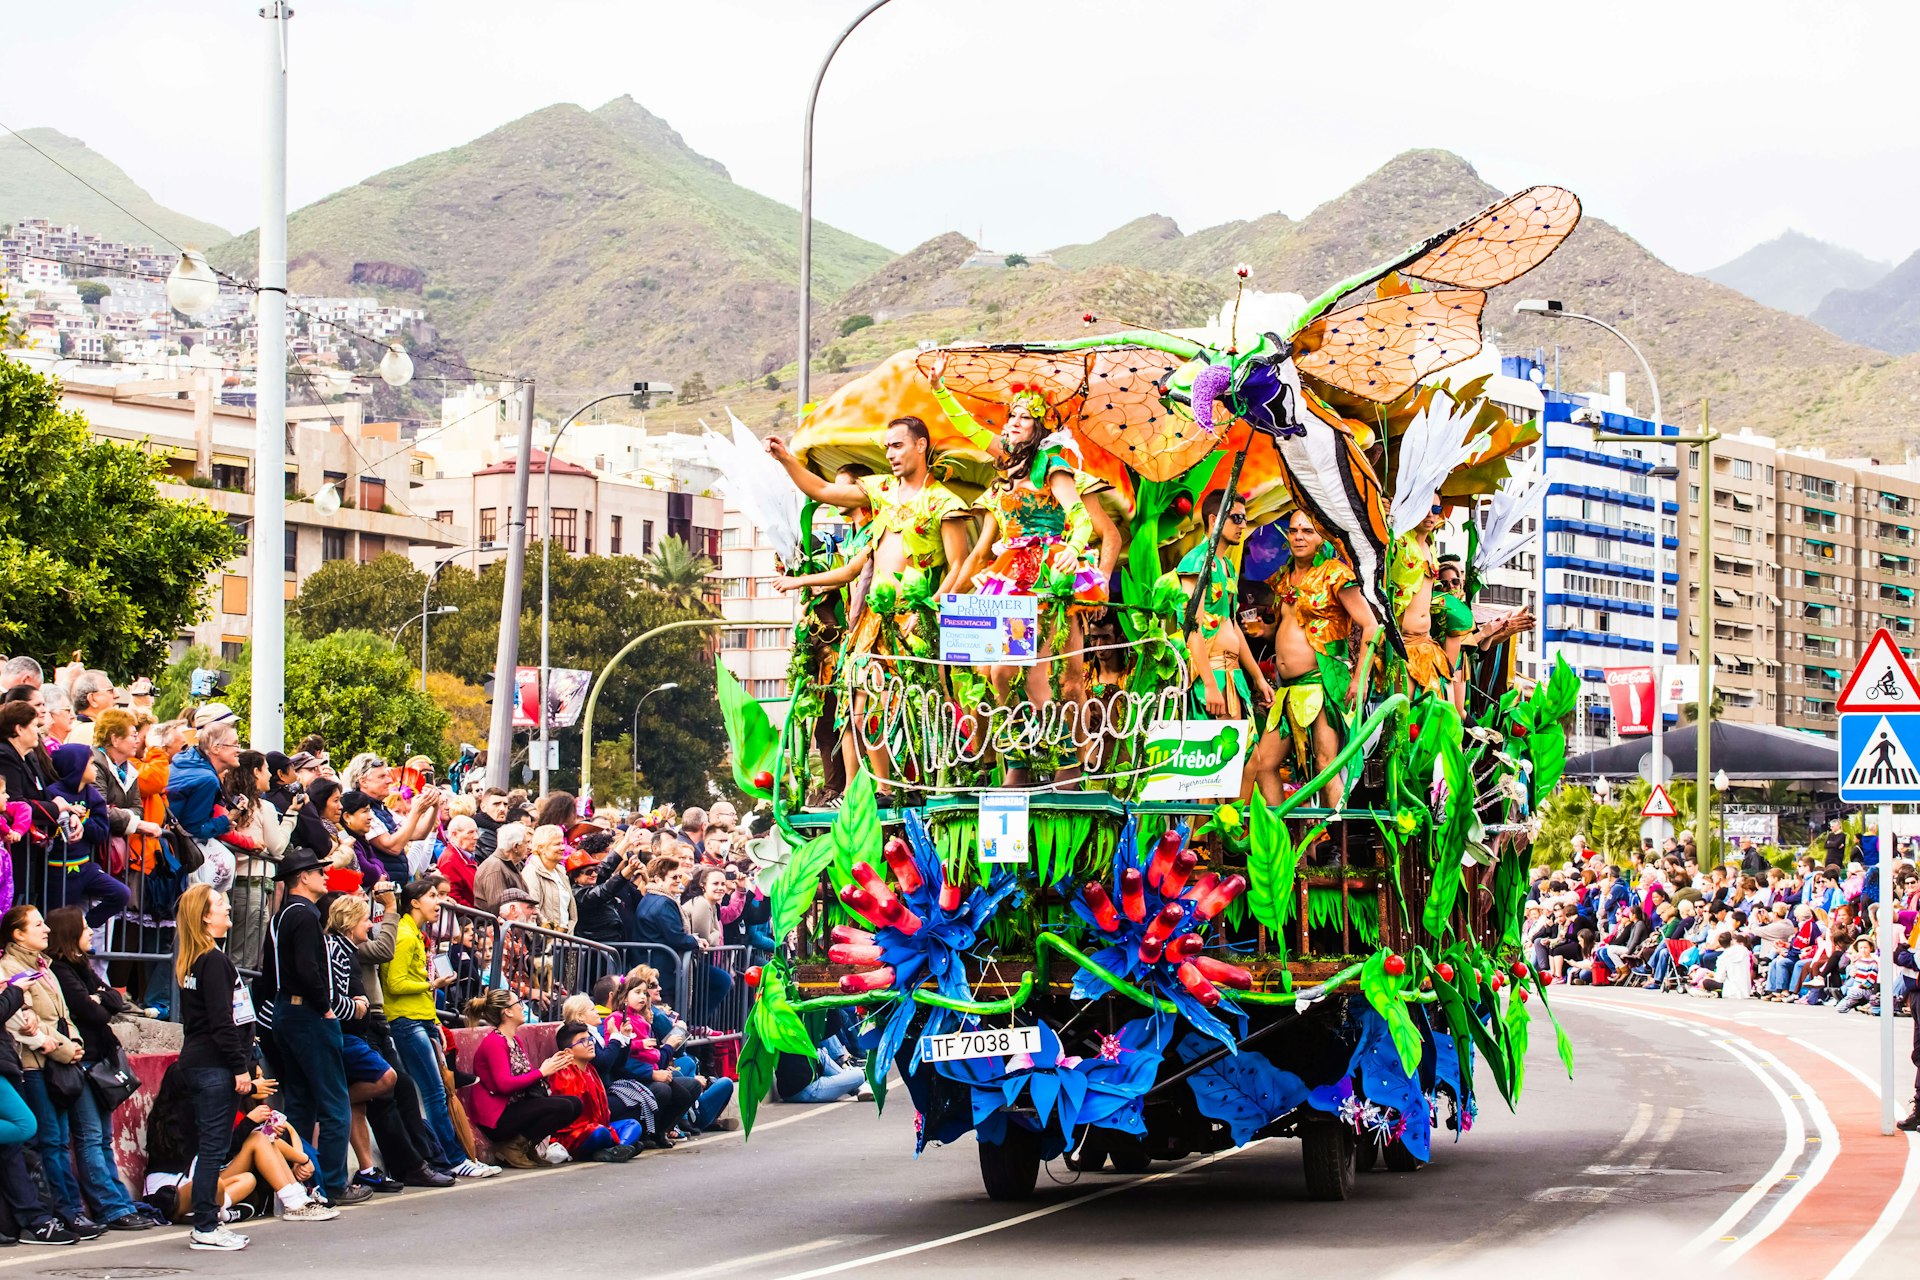 Carnival groups and costumed characters parade through the streets in Tenerife